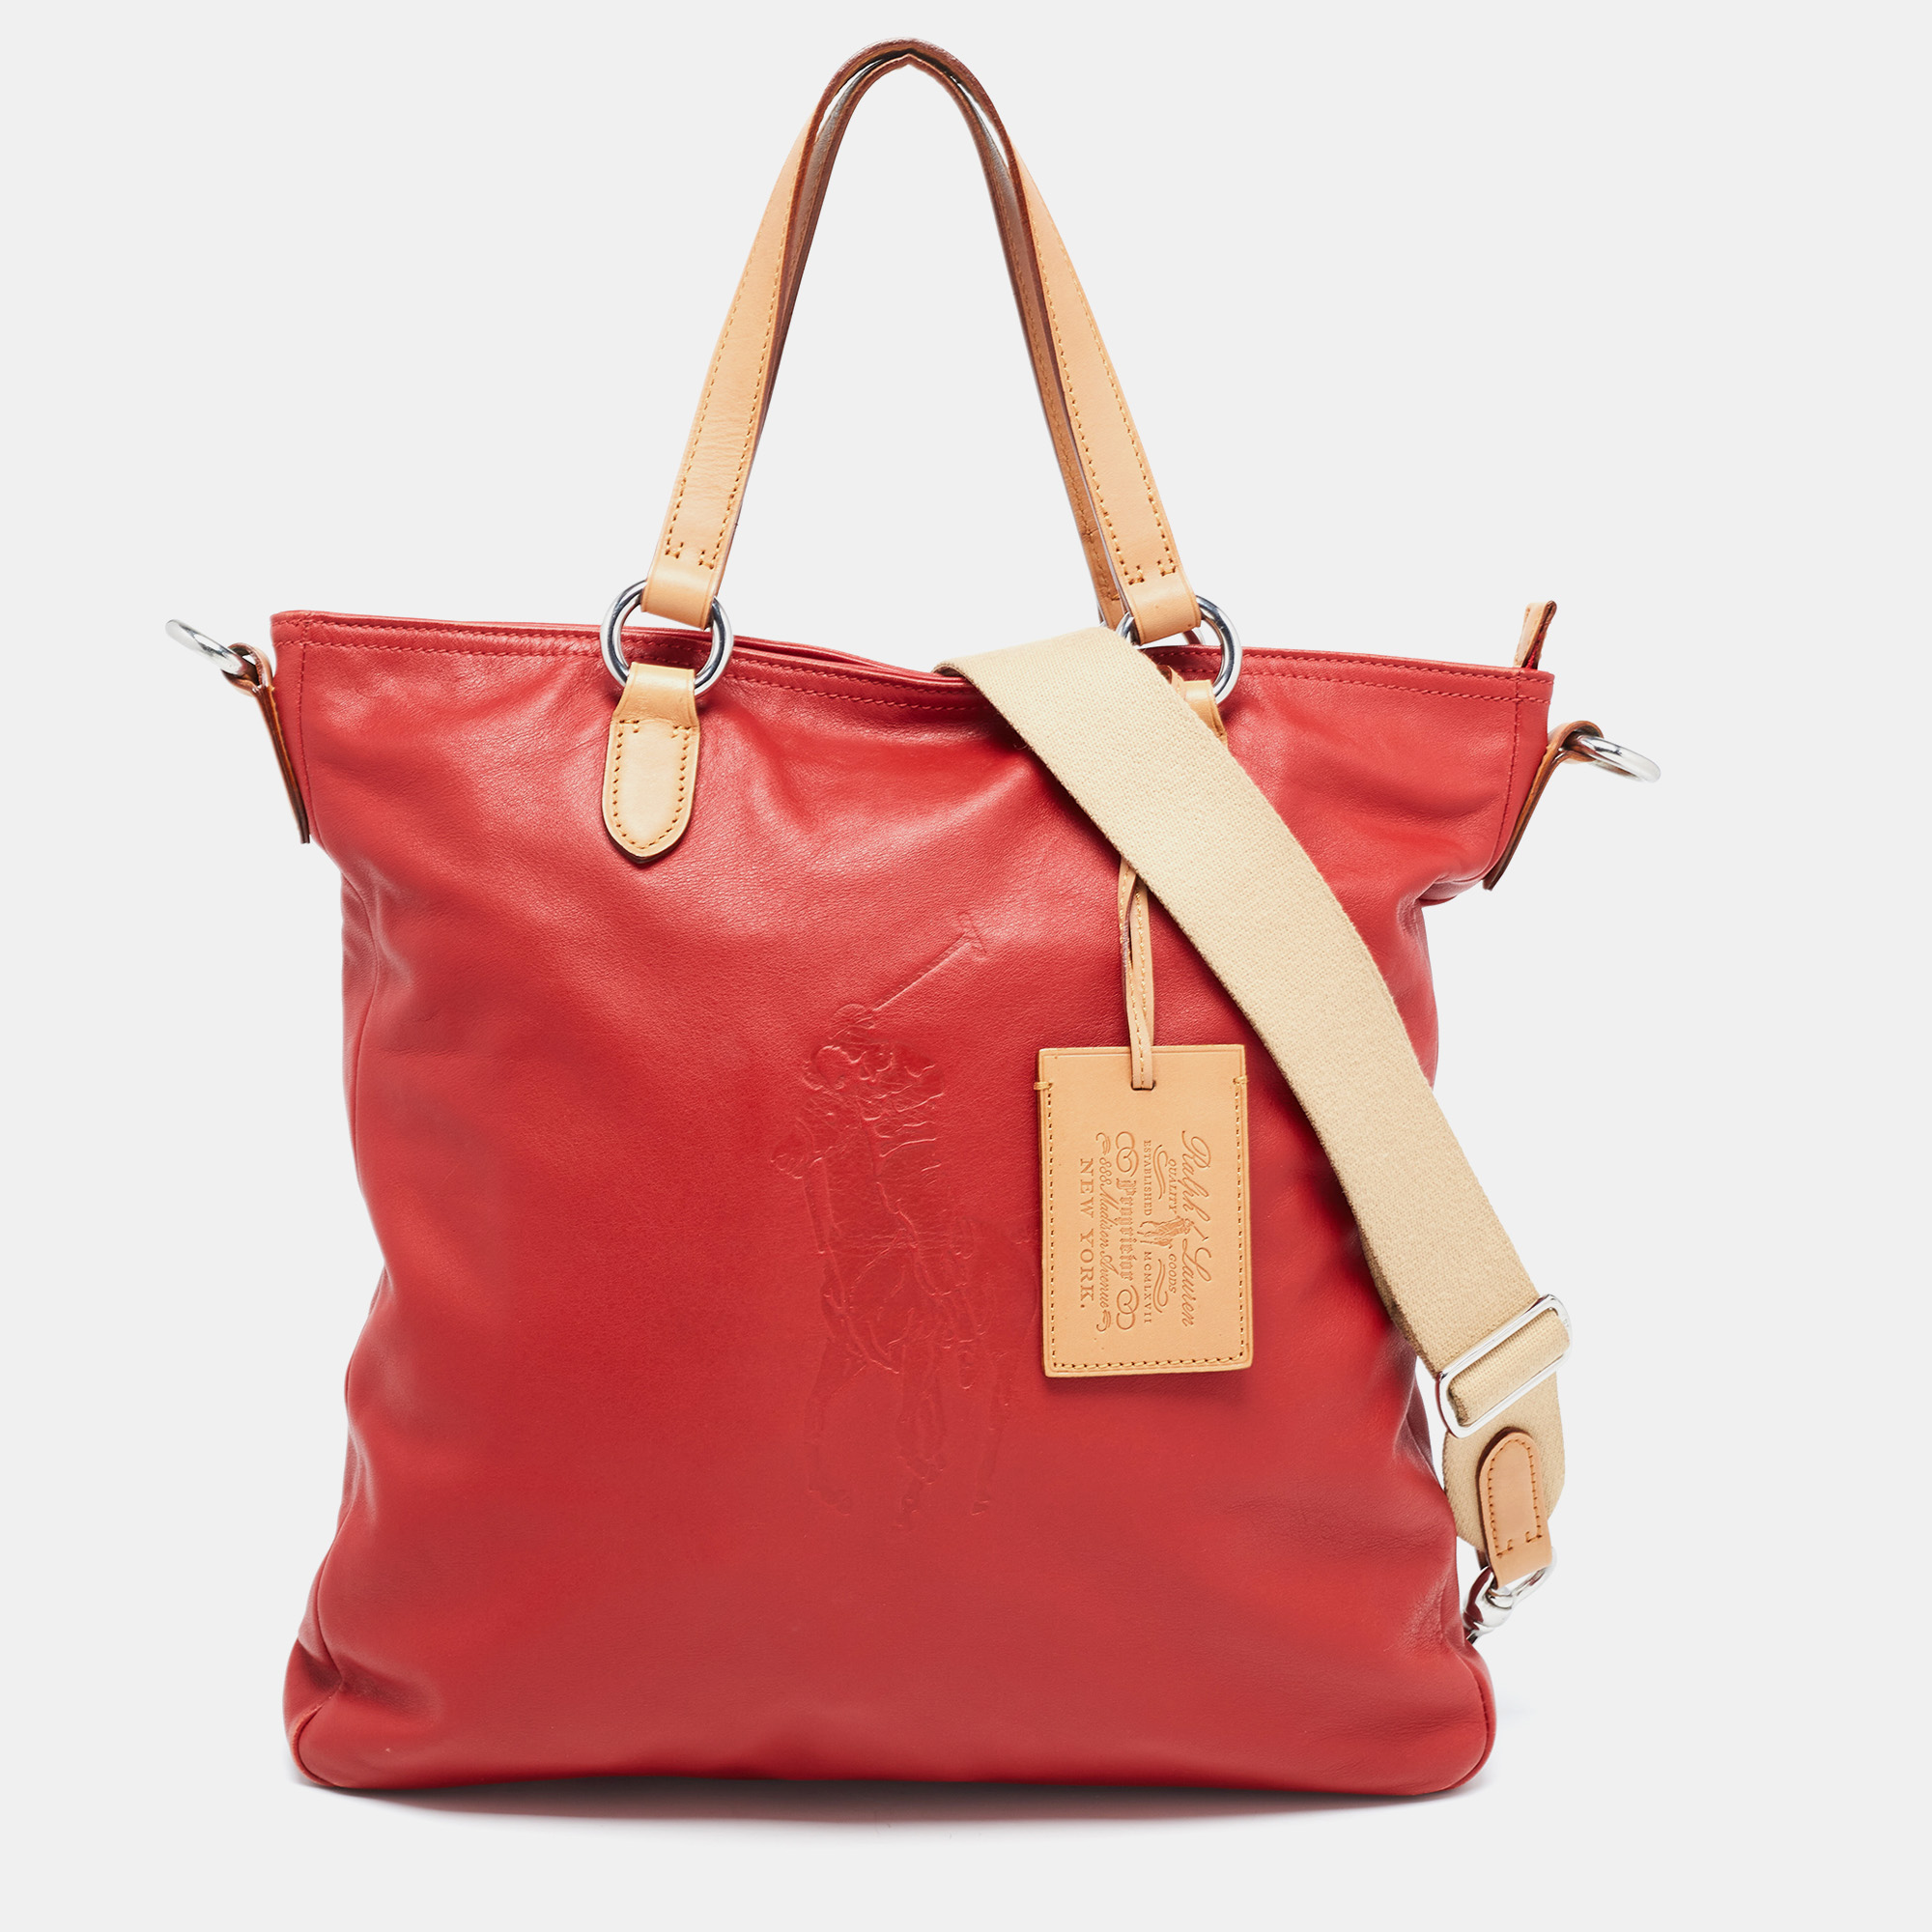 When you carry this Ralph Lauren creation be ready to catch admiring glances as this tote is stylish and functional. The bag has been crafted from leather and designed with buckles. It is equipped with two handles and a very spacious canvas and leather interior.